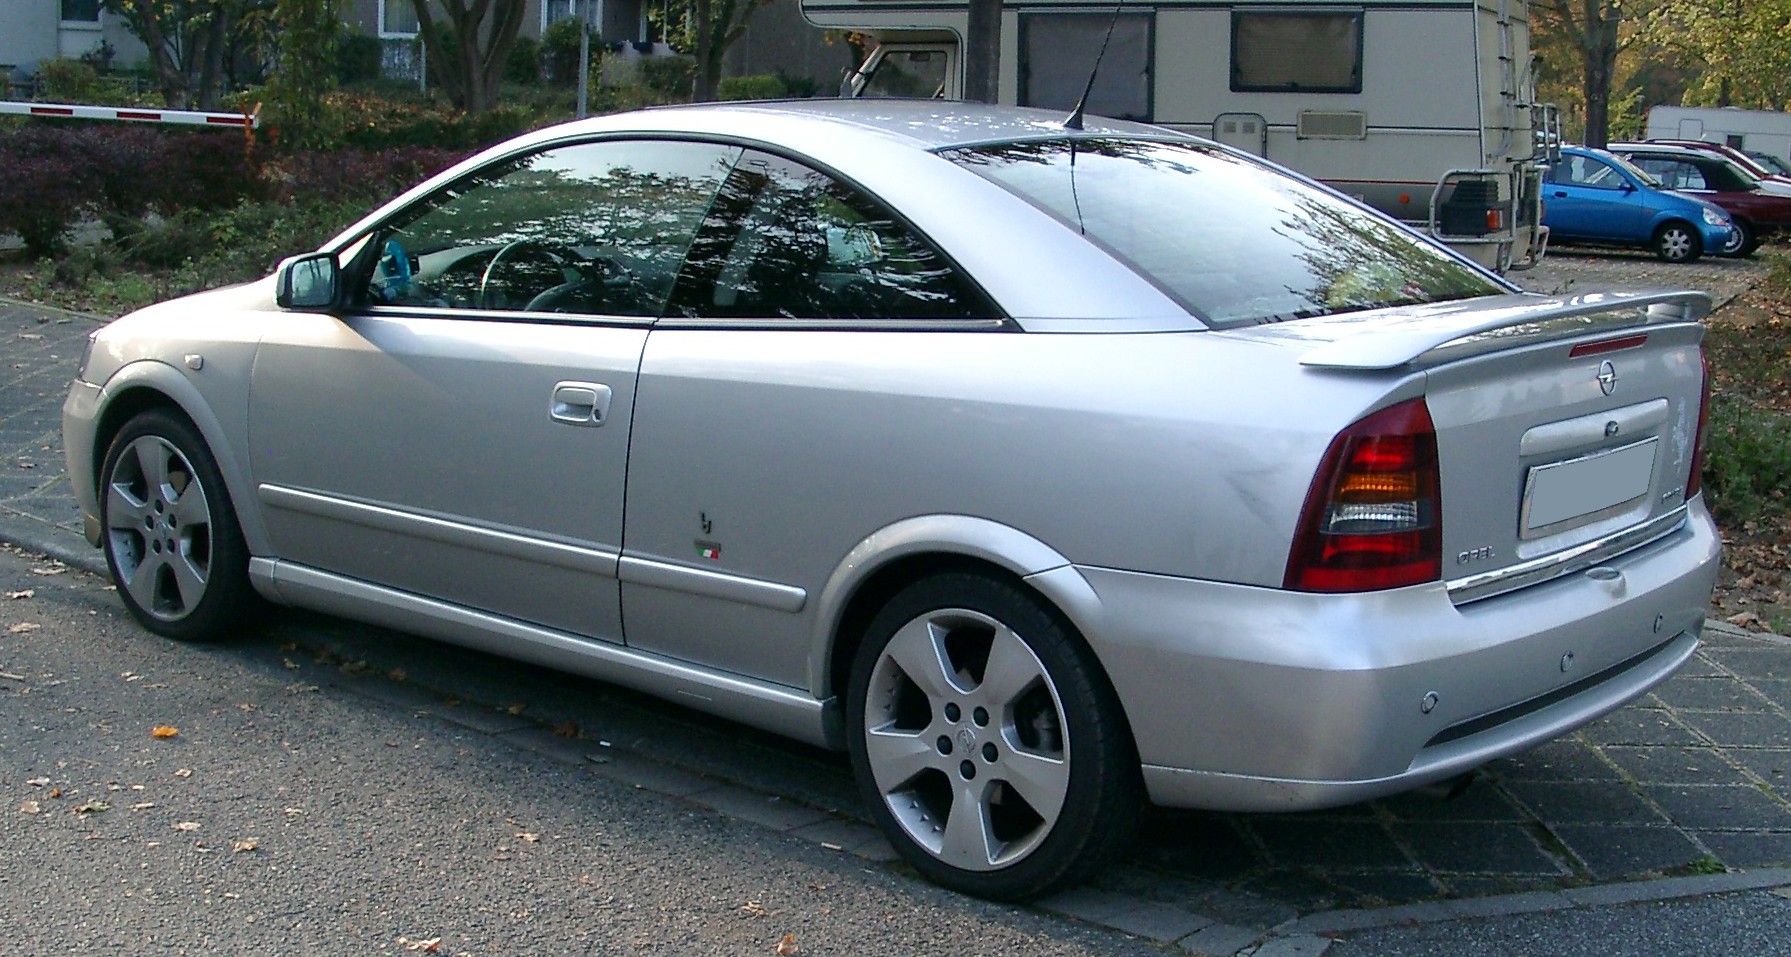 Opel_Astra_G_Coupe_rear_20071011.jpg